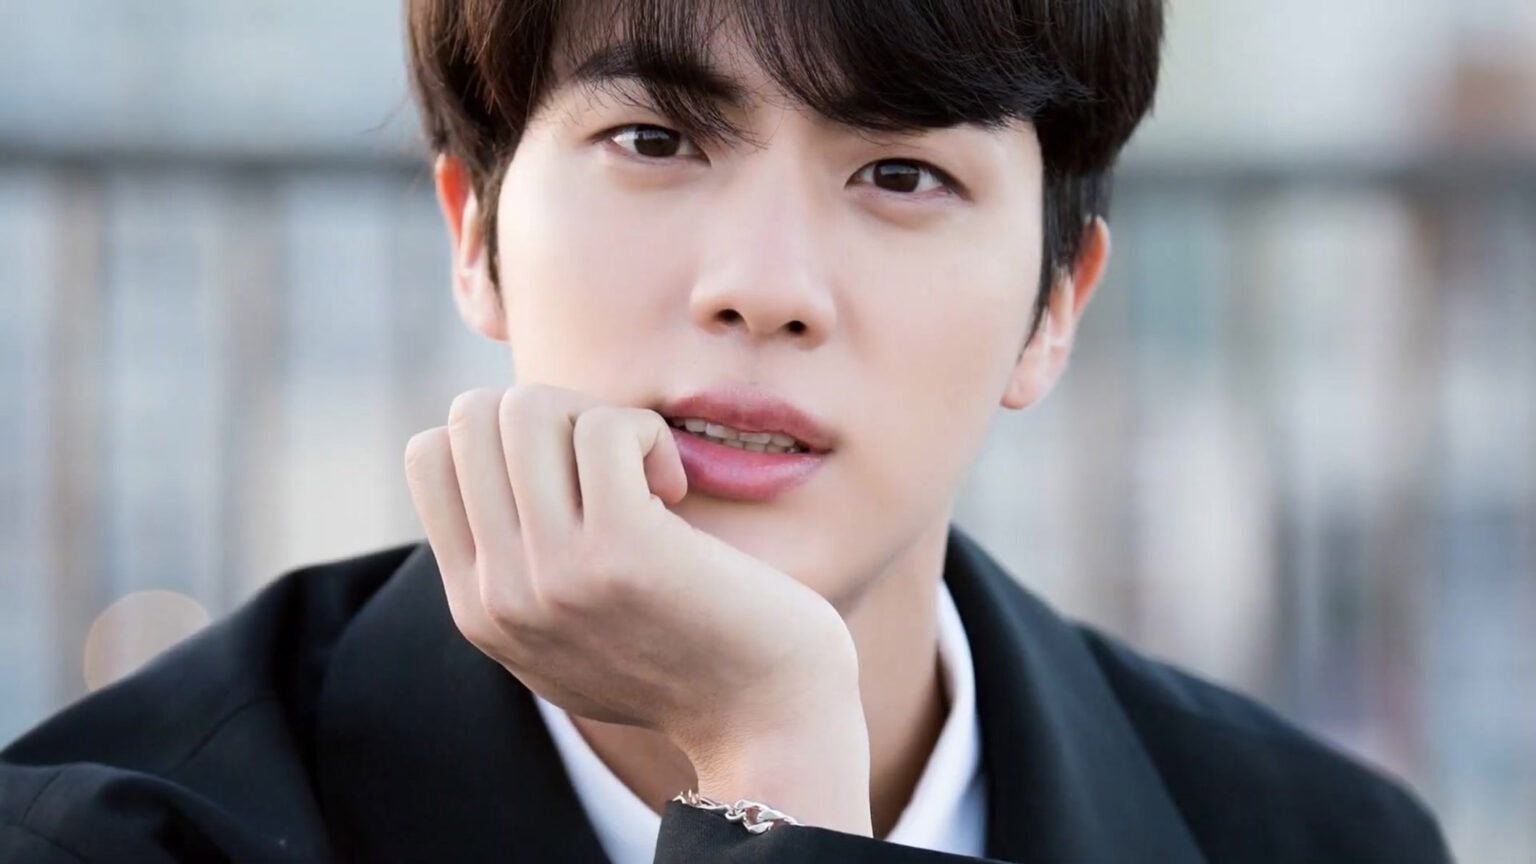 Are you new to falling in love with BTS? If so, here's everything you could want to know about the Jin.